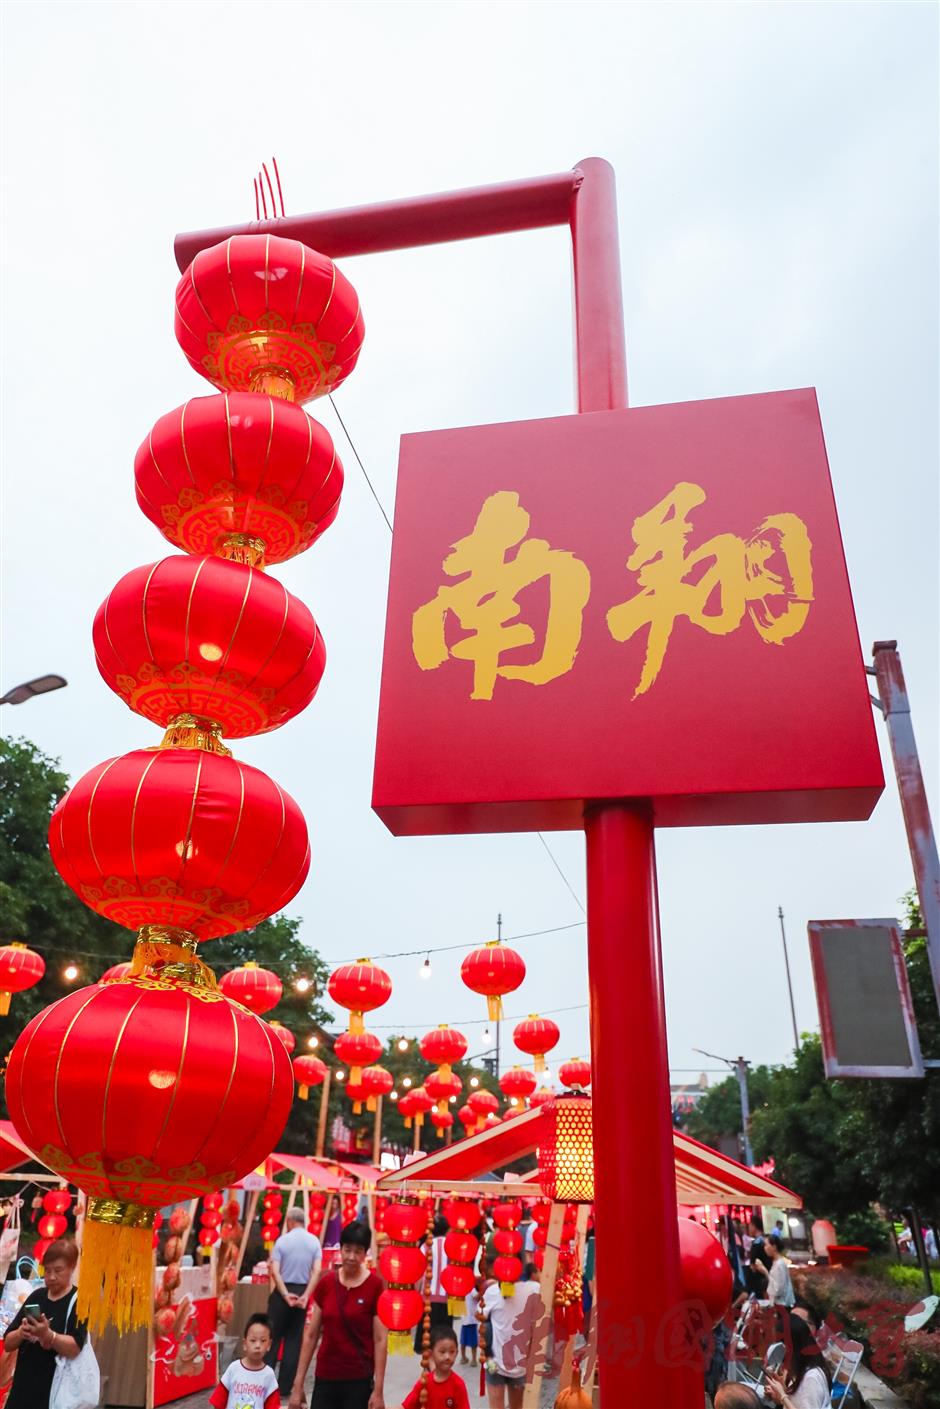 Nanxiang Guochao and Xiaolong Cultural Festival begins in Jiading District